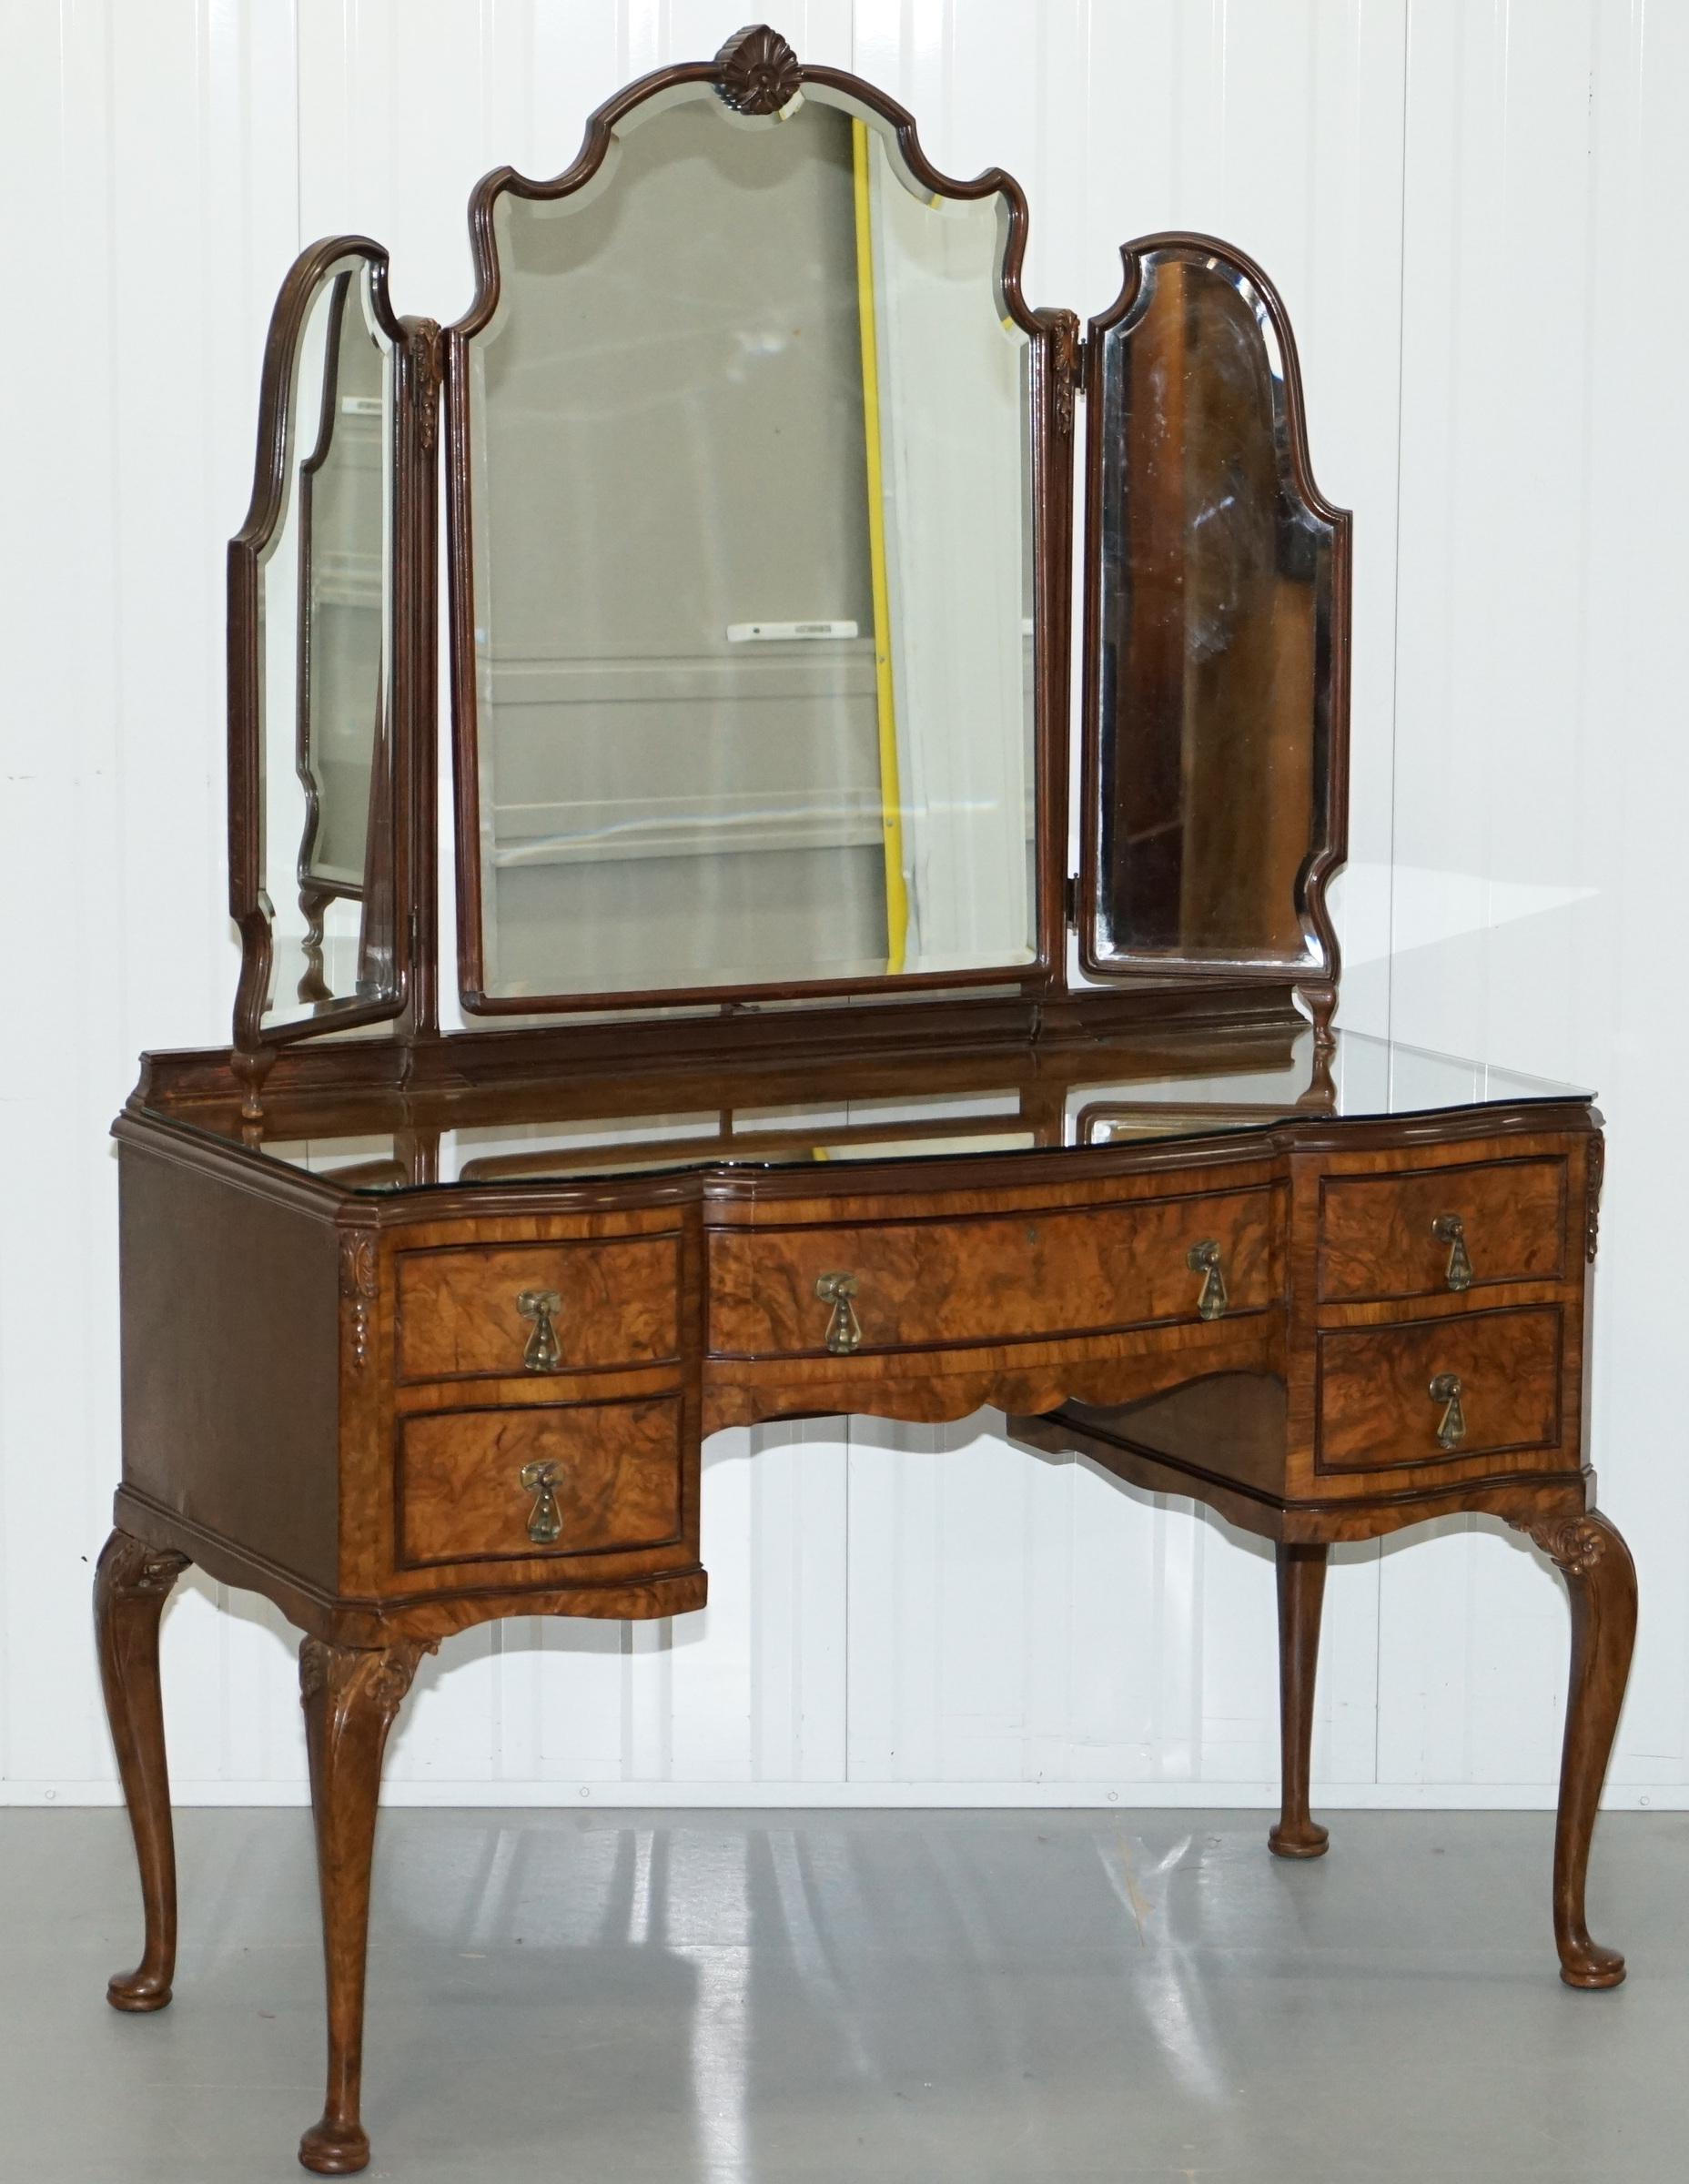 We are delighted to offer for sale this lovely handmade solid walnut Victorian dressing table with tri-folding mirror and stool made in the Georgian Irish manor 

One of the most beautiful dressing tables I have ever seen, this piece is luxury